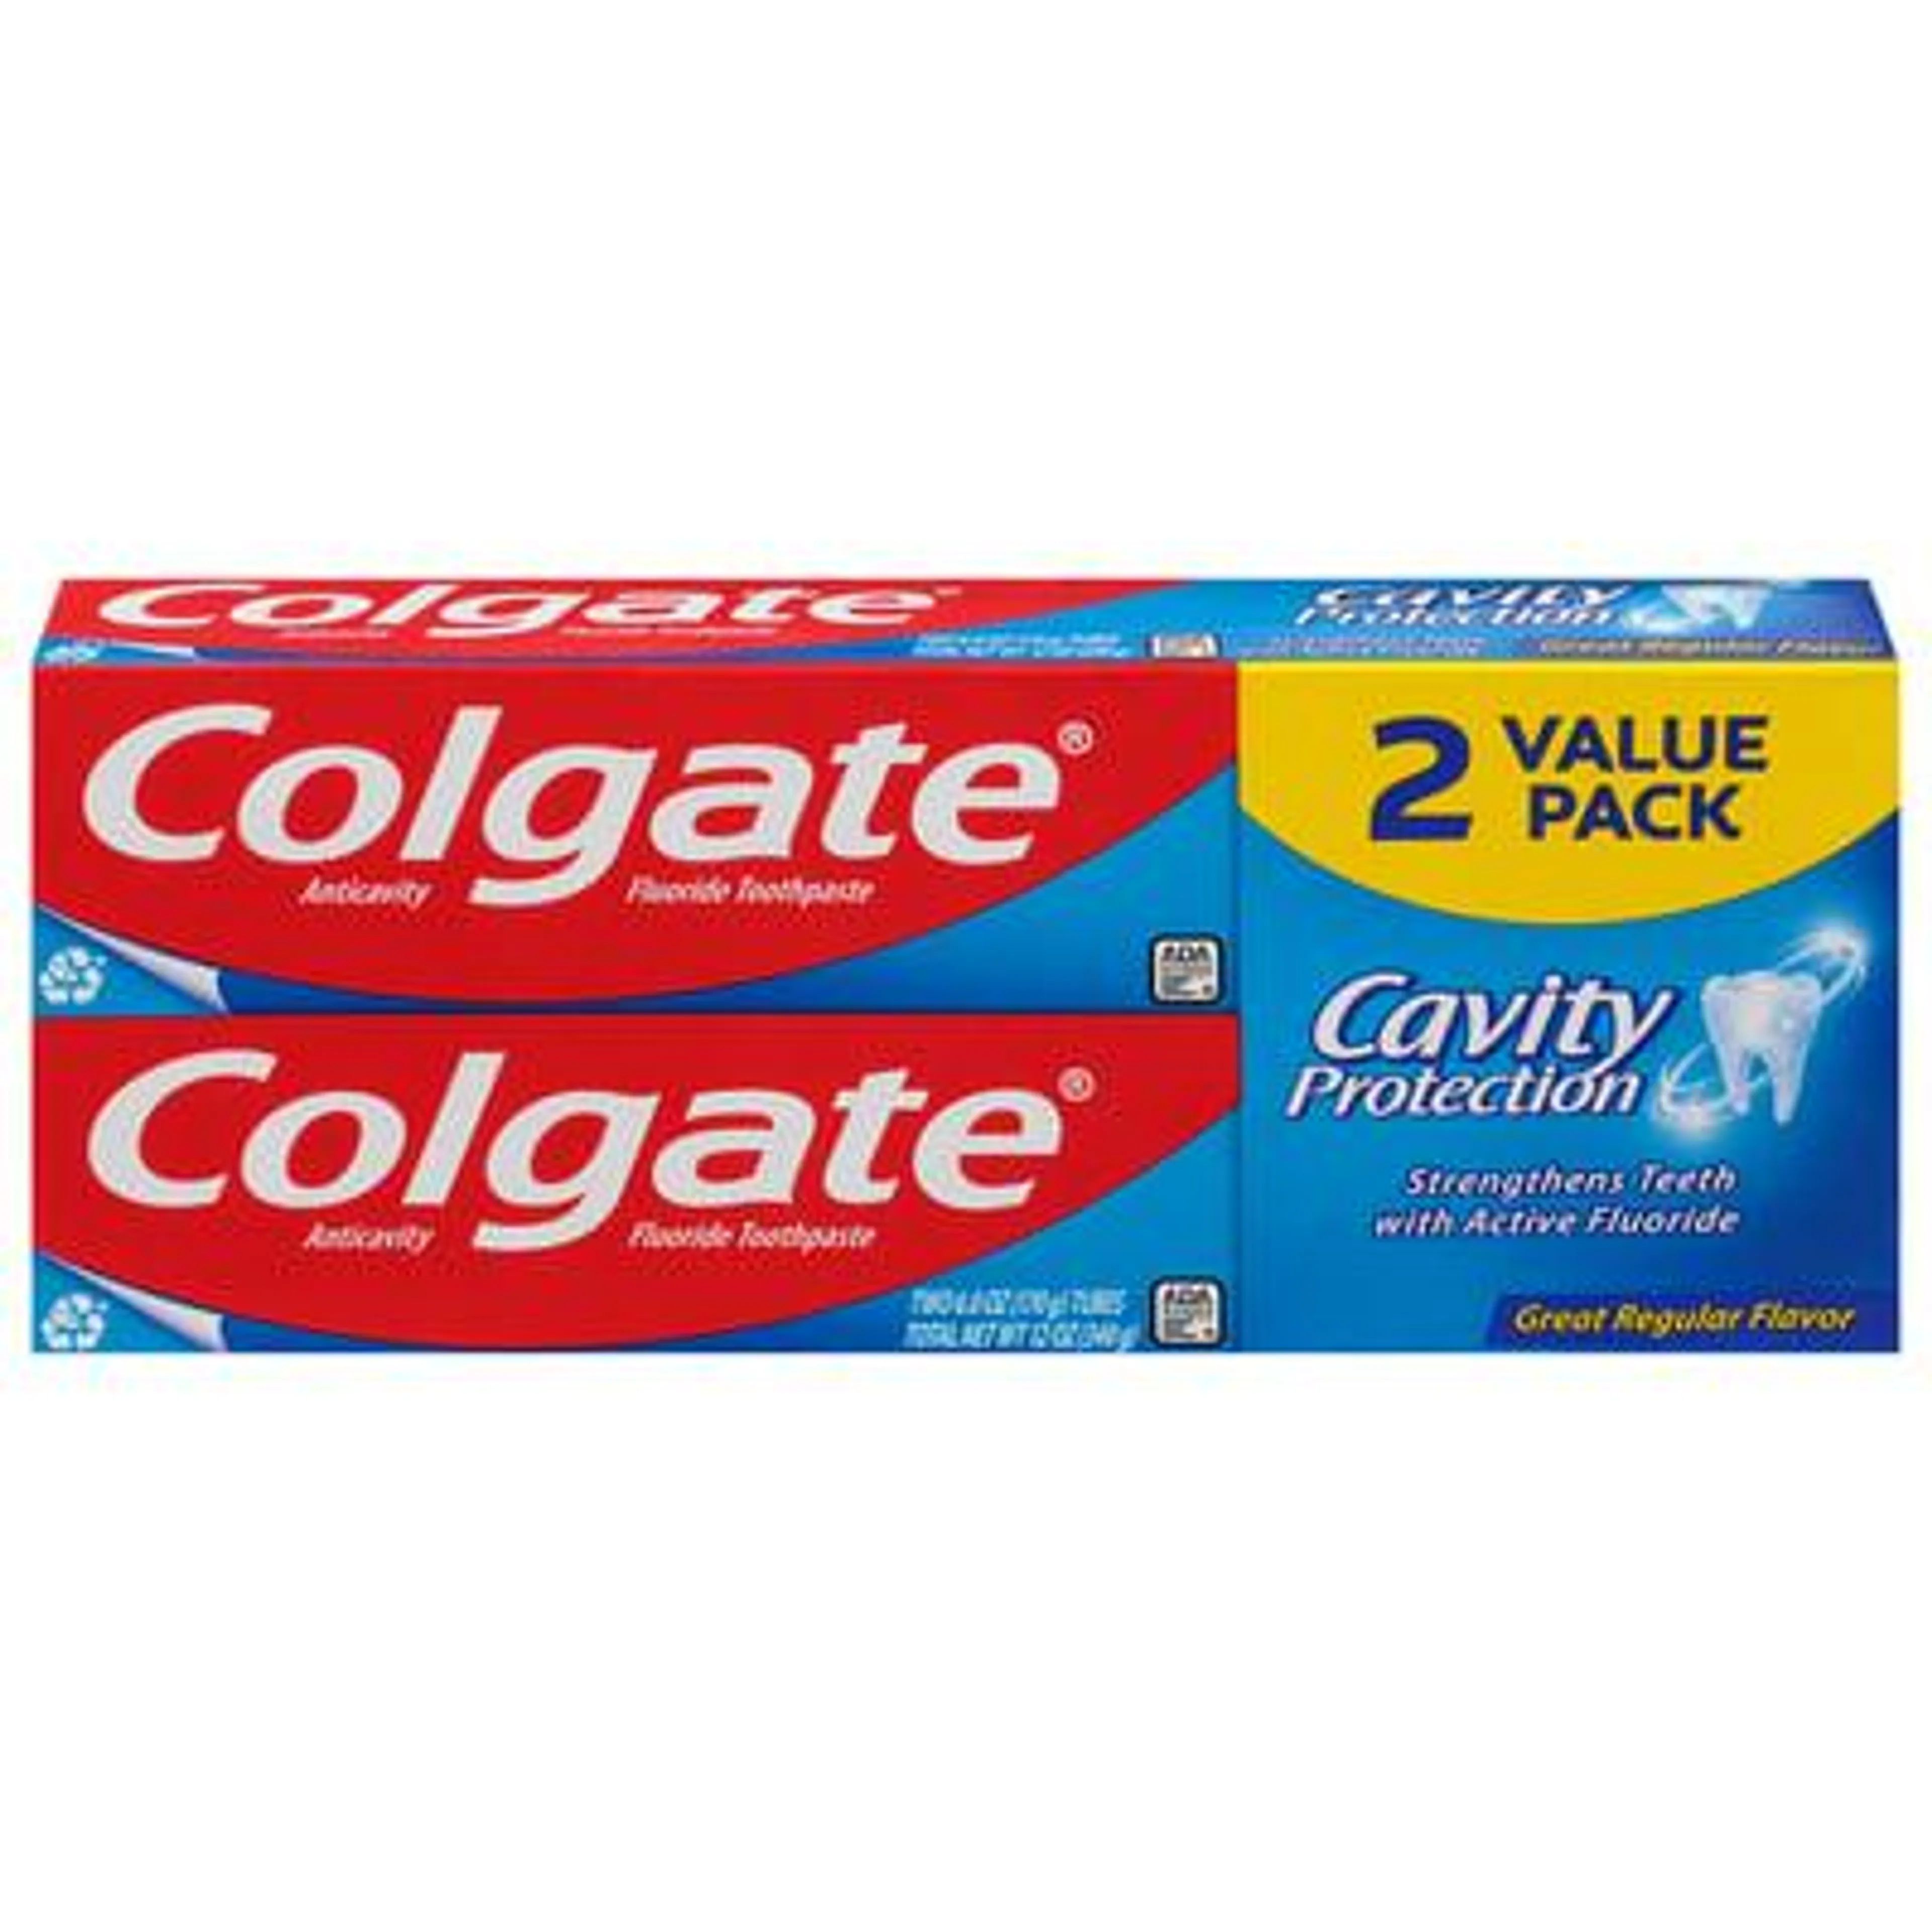 Colgate, Toothpaste, Cavity Protection, Great Regular Flavor, 2 Value Pack